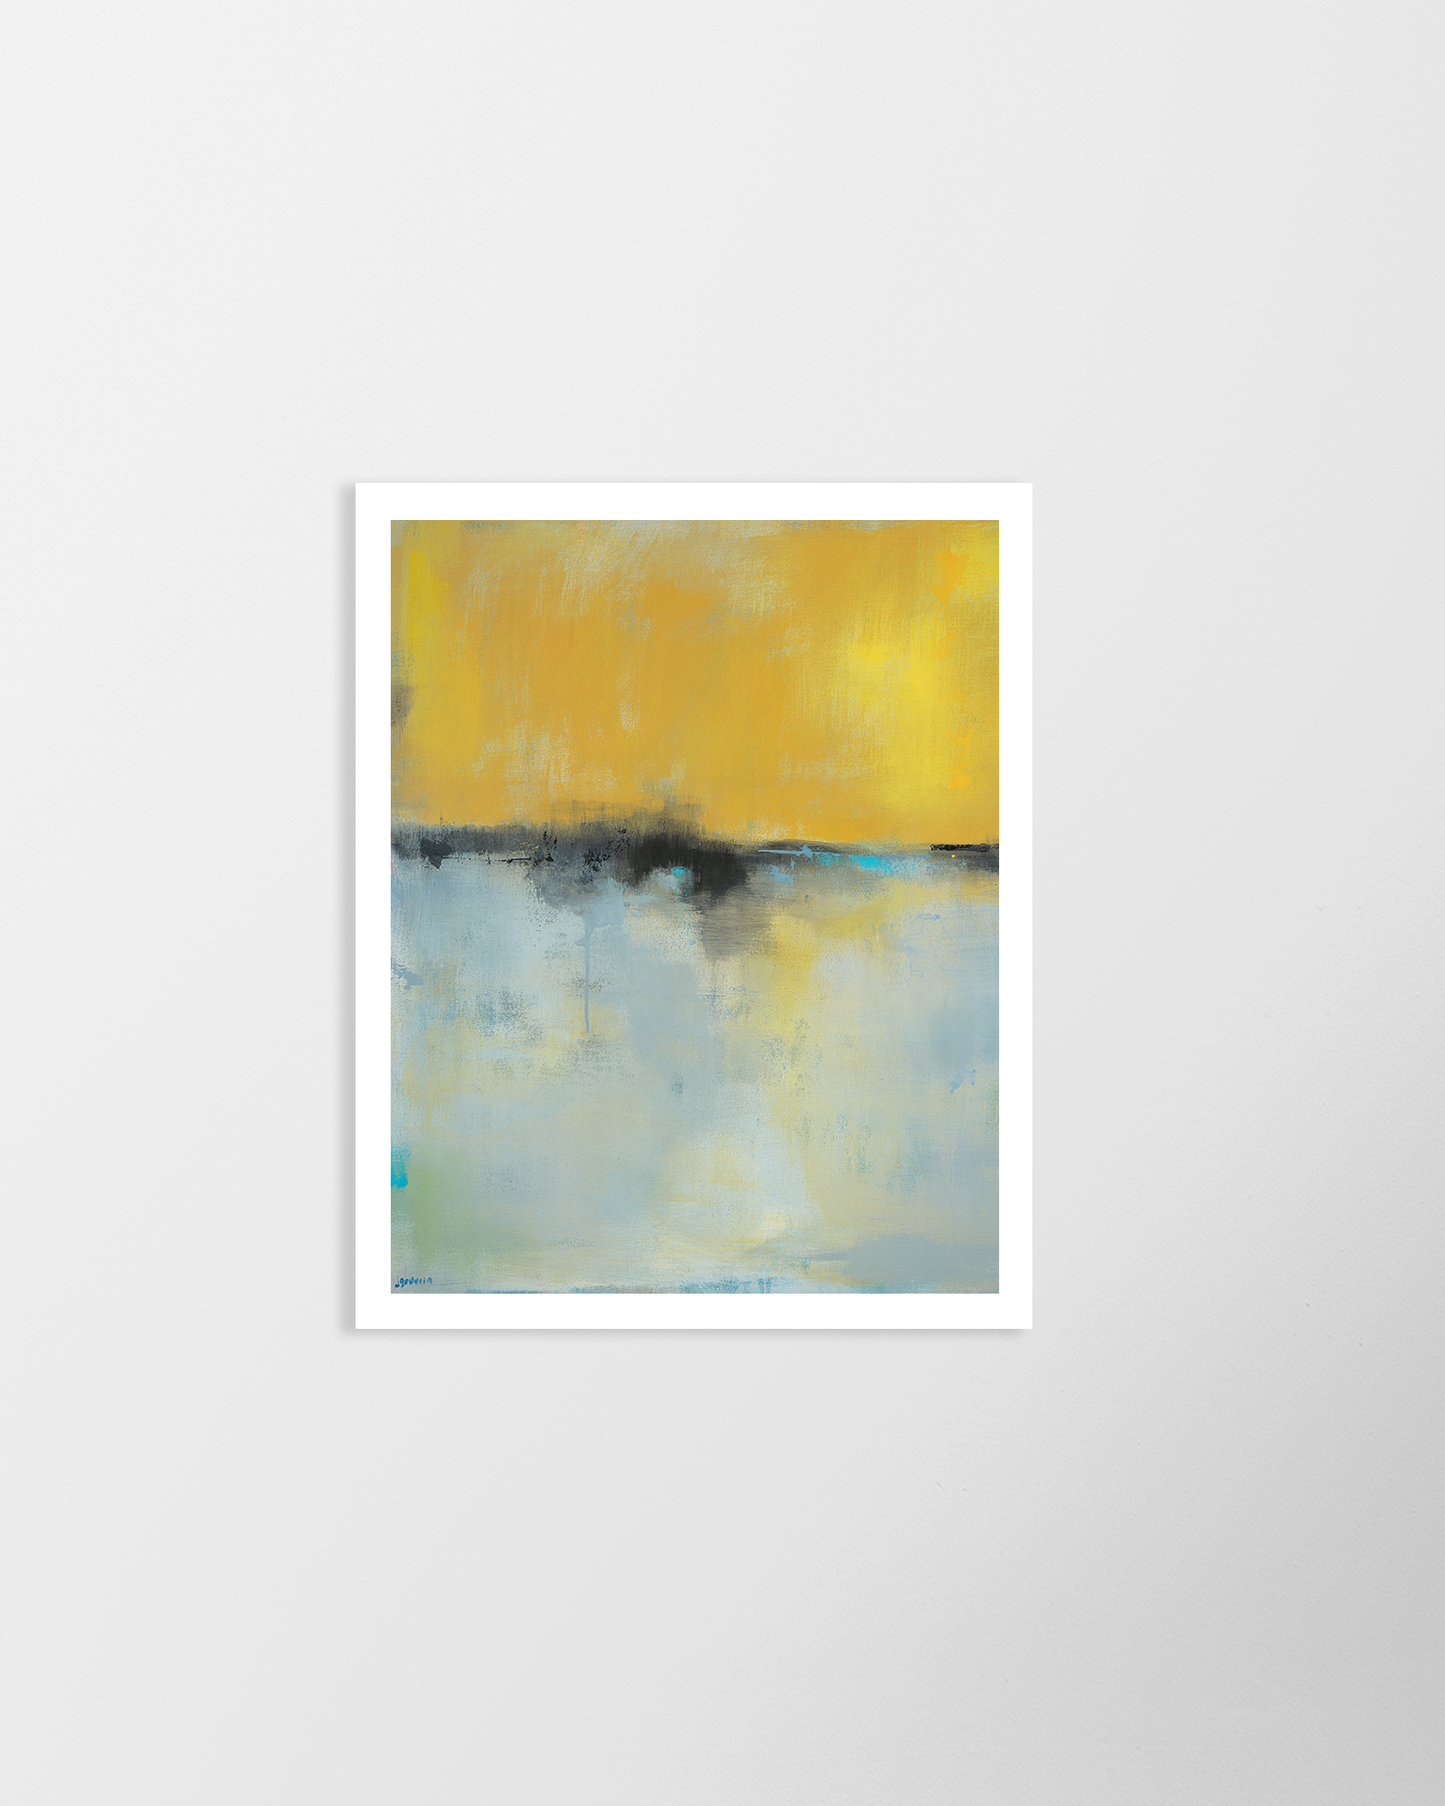 Melted Like Butter – print by Jacquie Gouveia